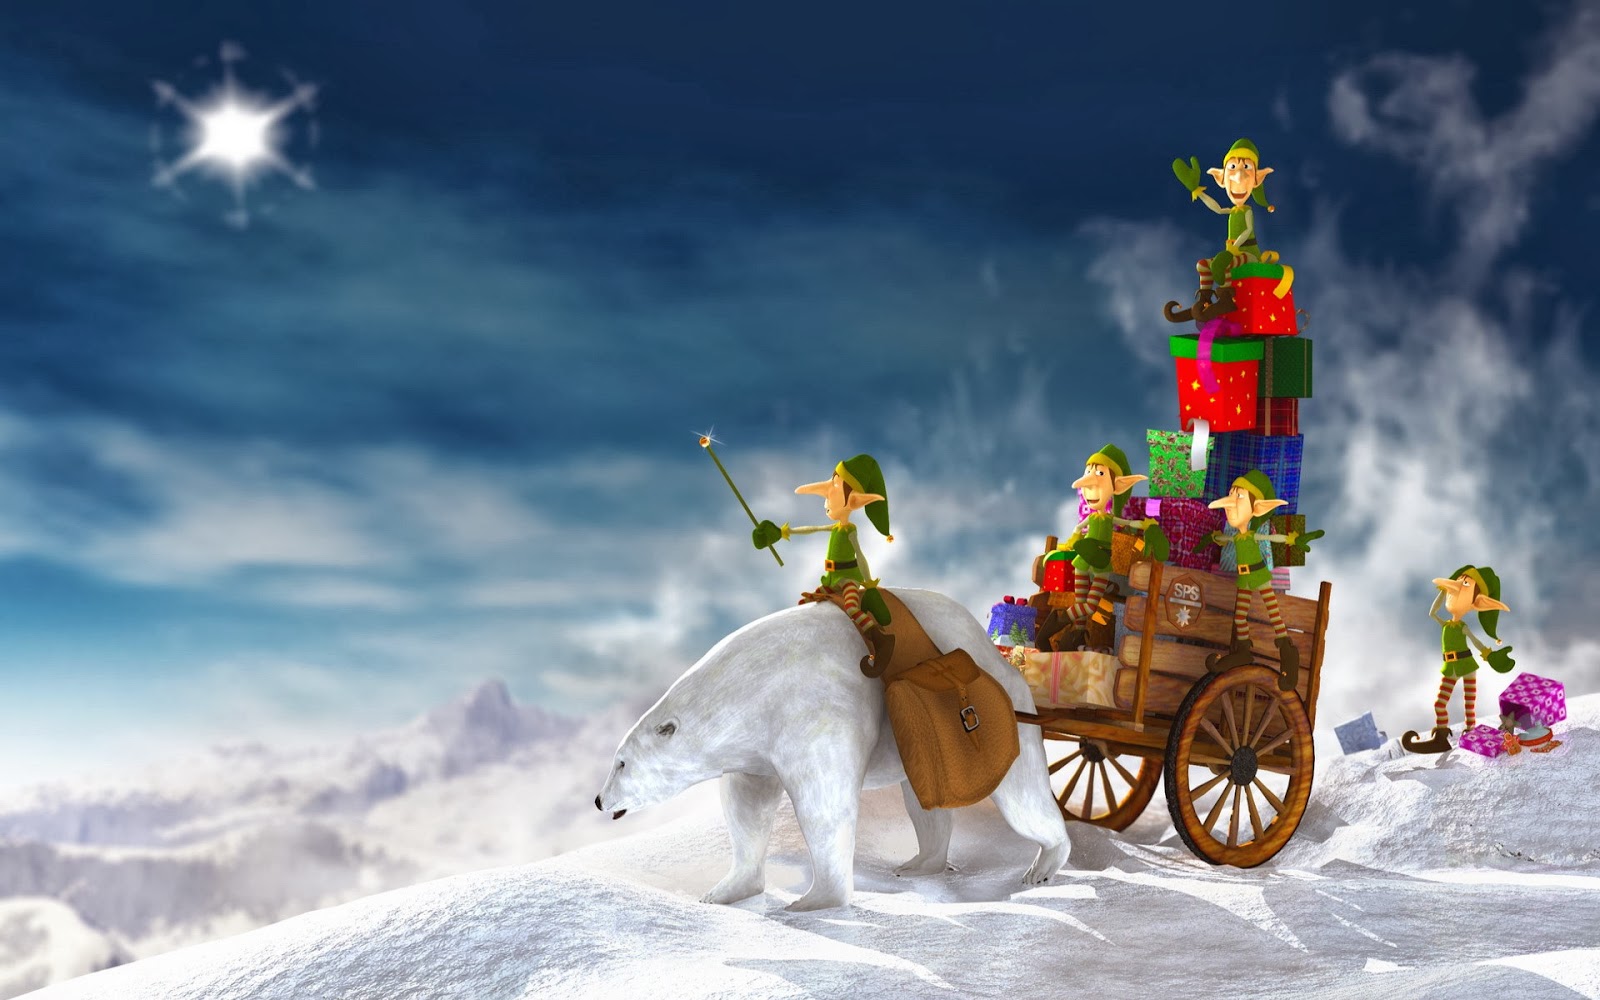 HD Wallpapers: Happy Christmas wallpapers